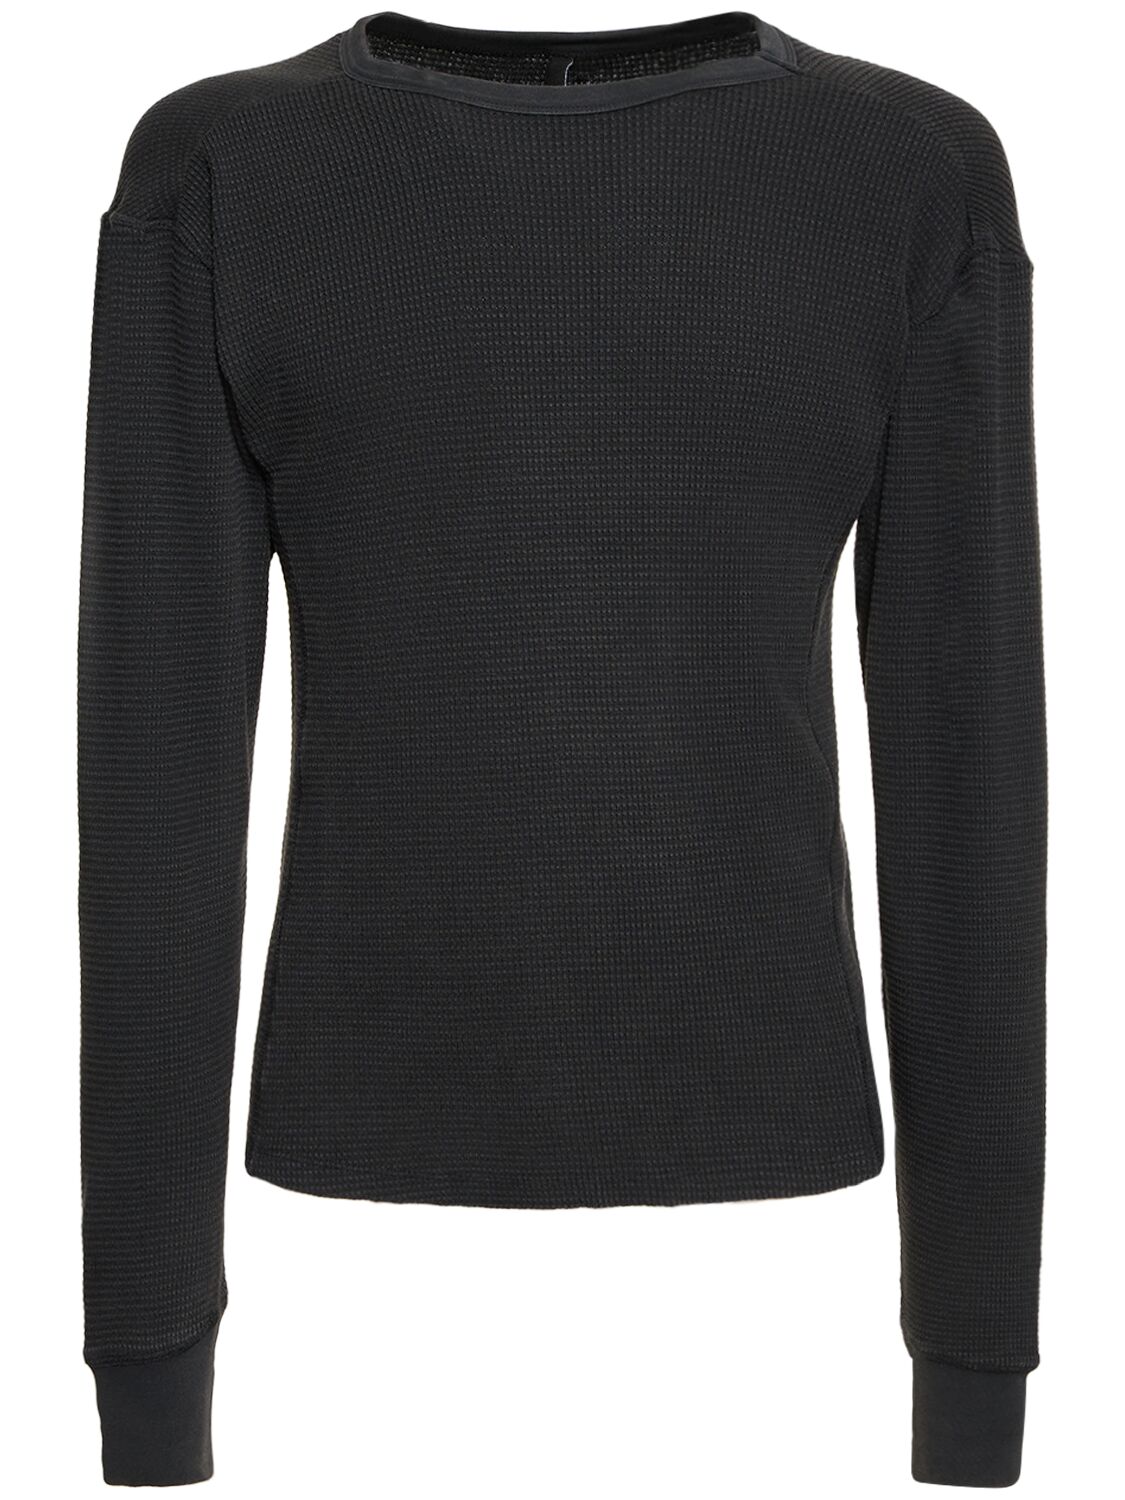 Shop Entire Studios Washed Black Thermal Long Sleeve T-shirt